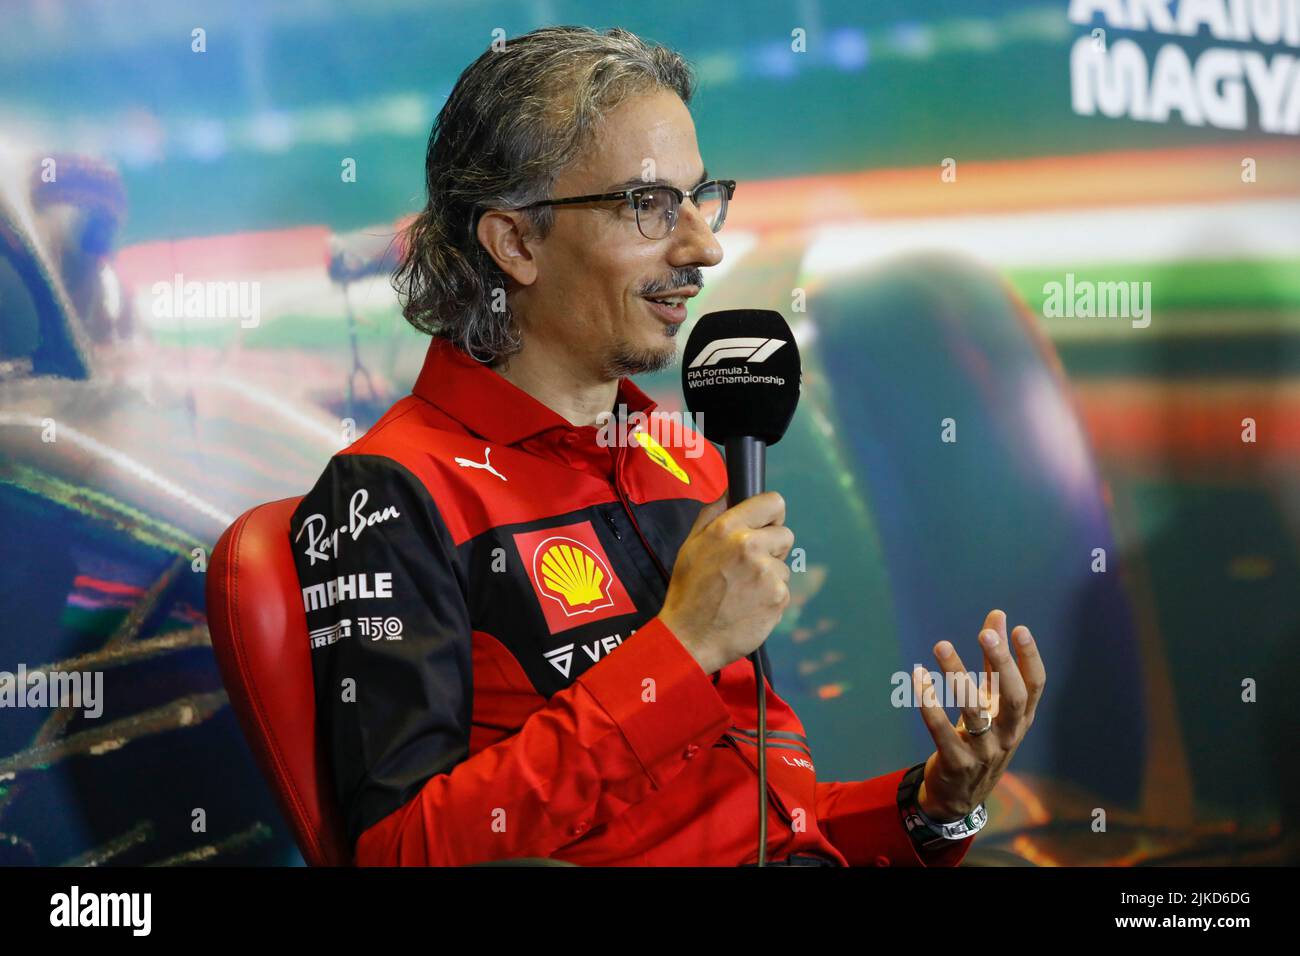 Mogyorod, Hungary. July 30th 2022. Formula 1 Hungarian Grand Prix at Hungaroring, Hungary. Pictured: Laurent Mekies, Racing Director and Head of Track Area of Scuderia Ferrari during press conference © Piotr Zajac/Alamy Live News Stock Photo